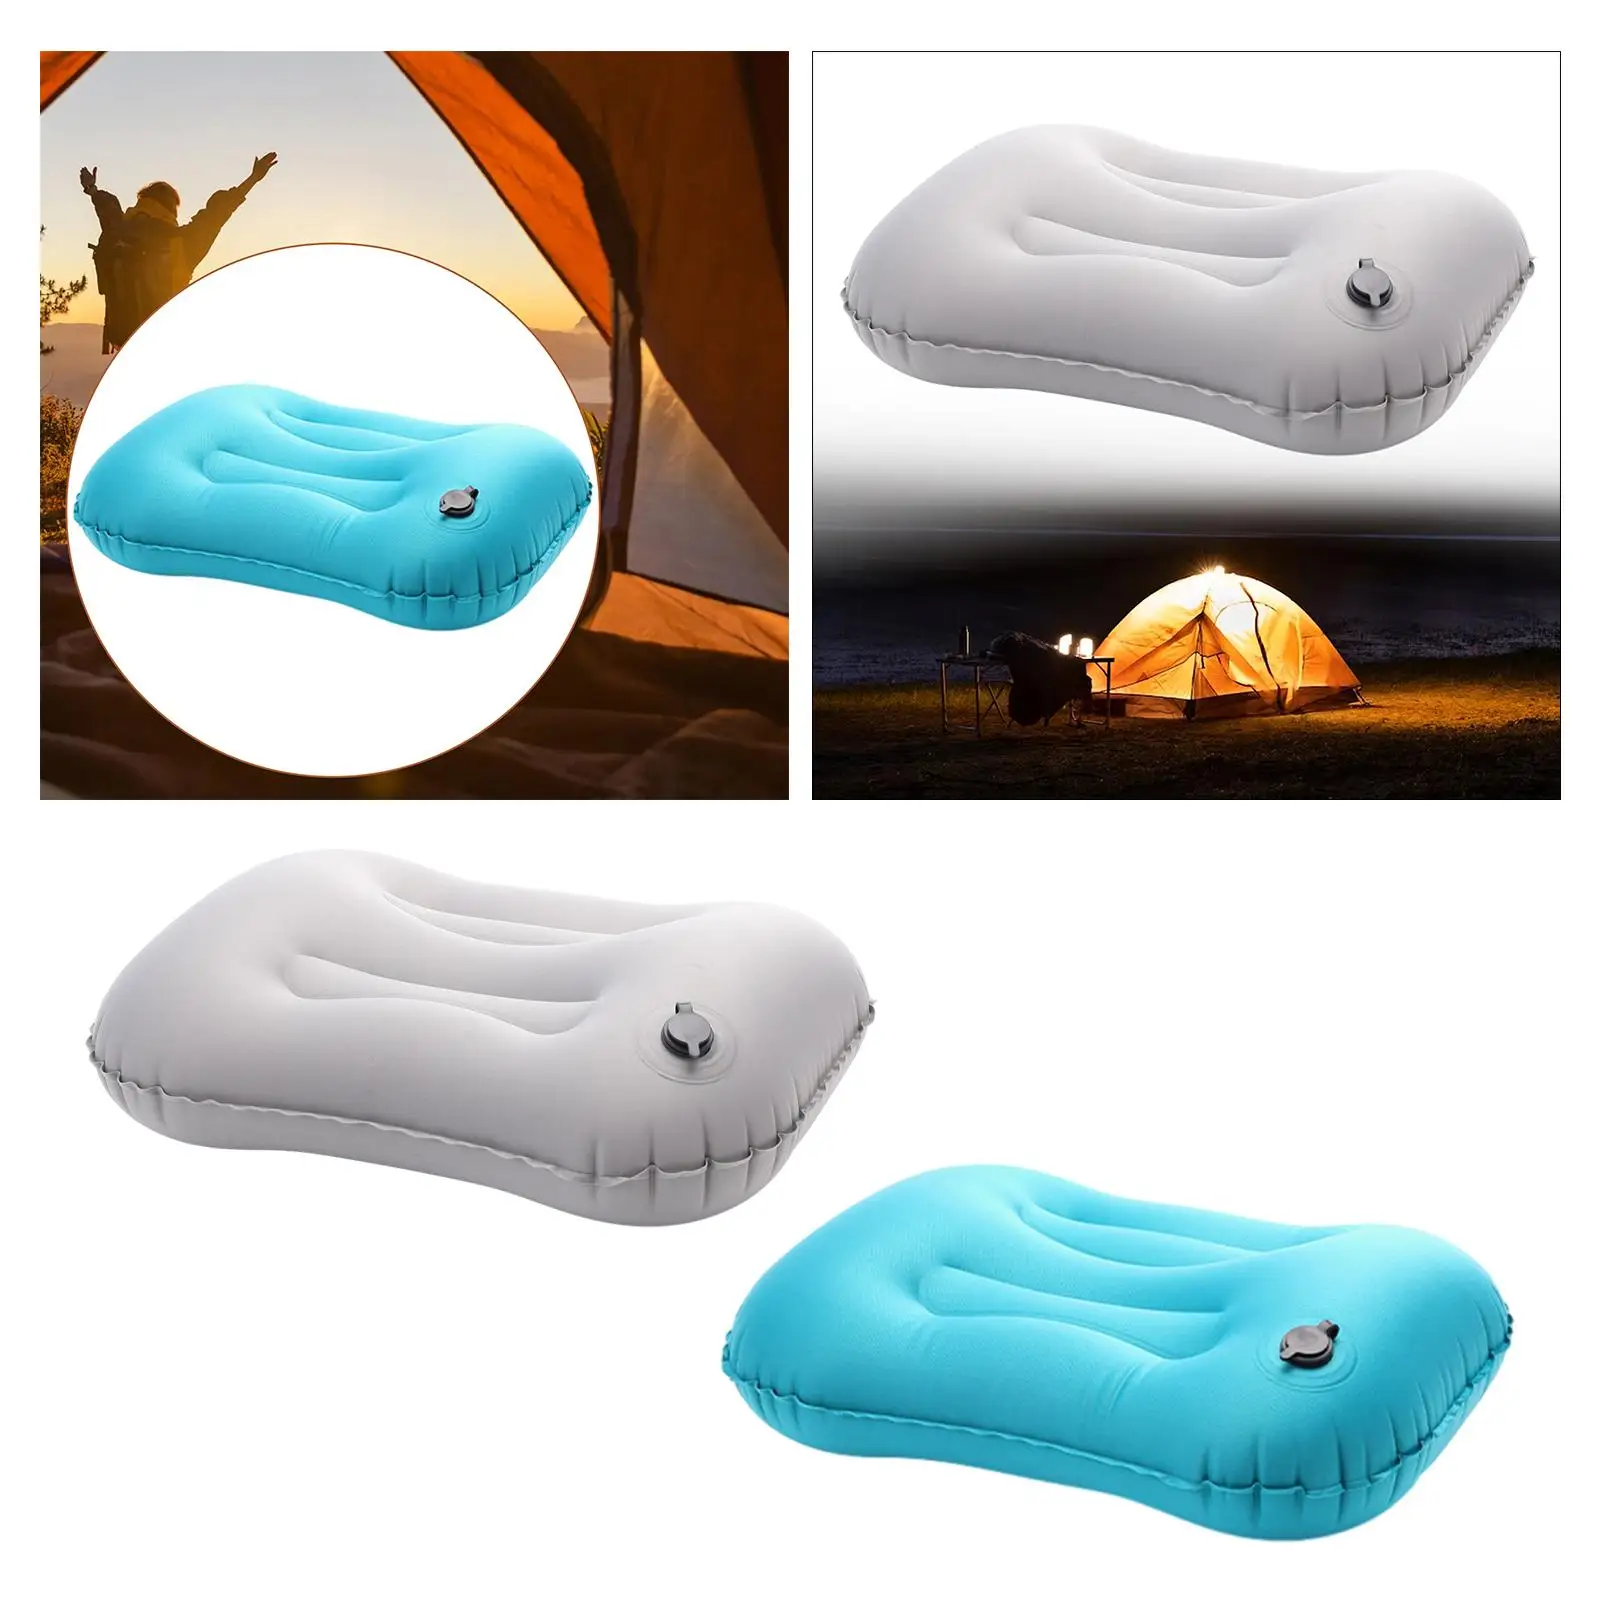 Camping Inflatable Pillow Sleeping Pillow Portable Lightweight Compressible Pillow for Nap Rest Outdoor Hammock Beach Hiking